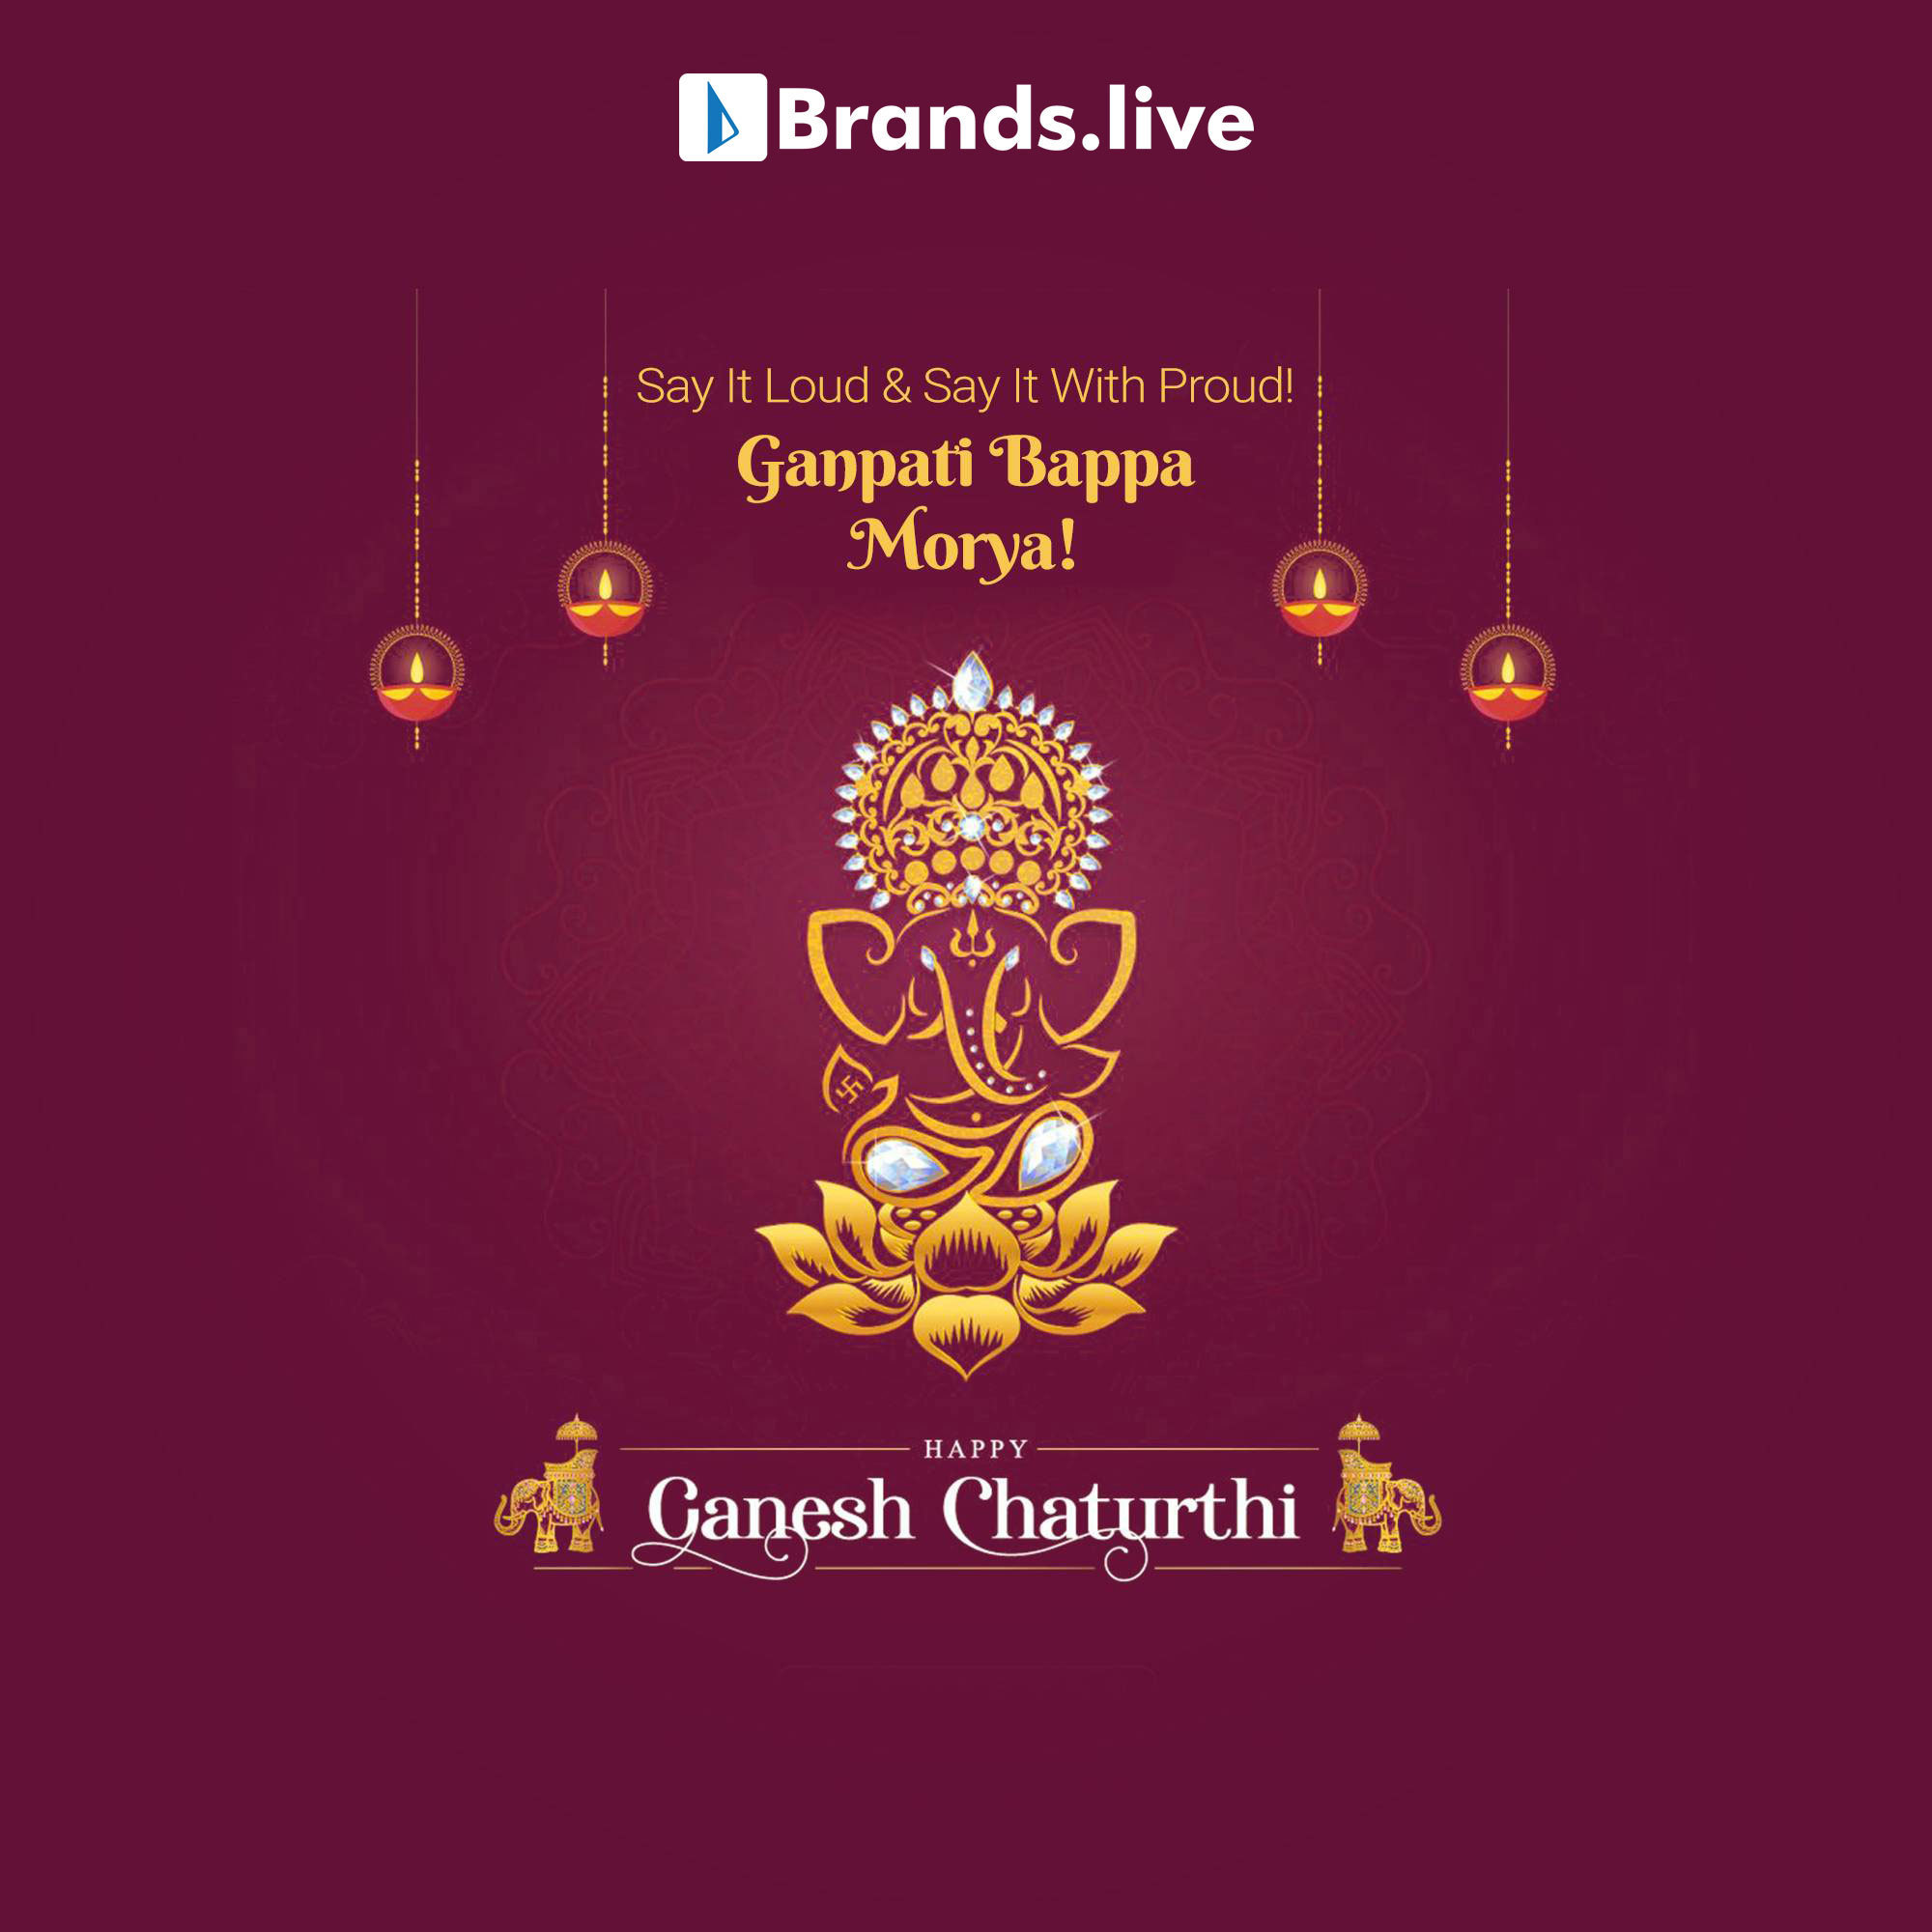 Ganesh Chaturthi Videos for your business